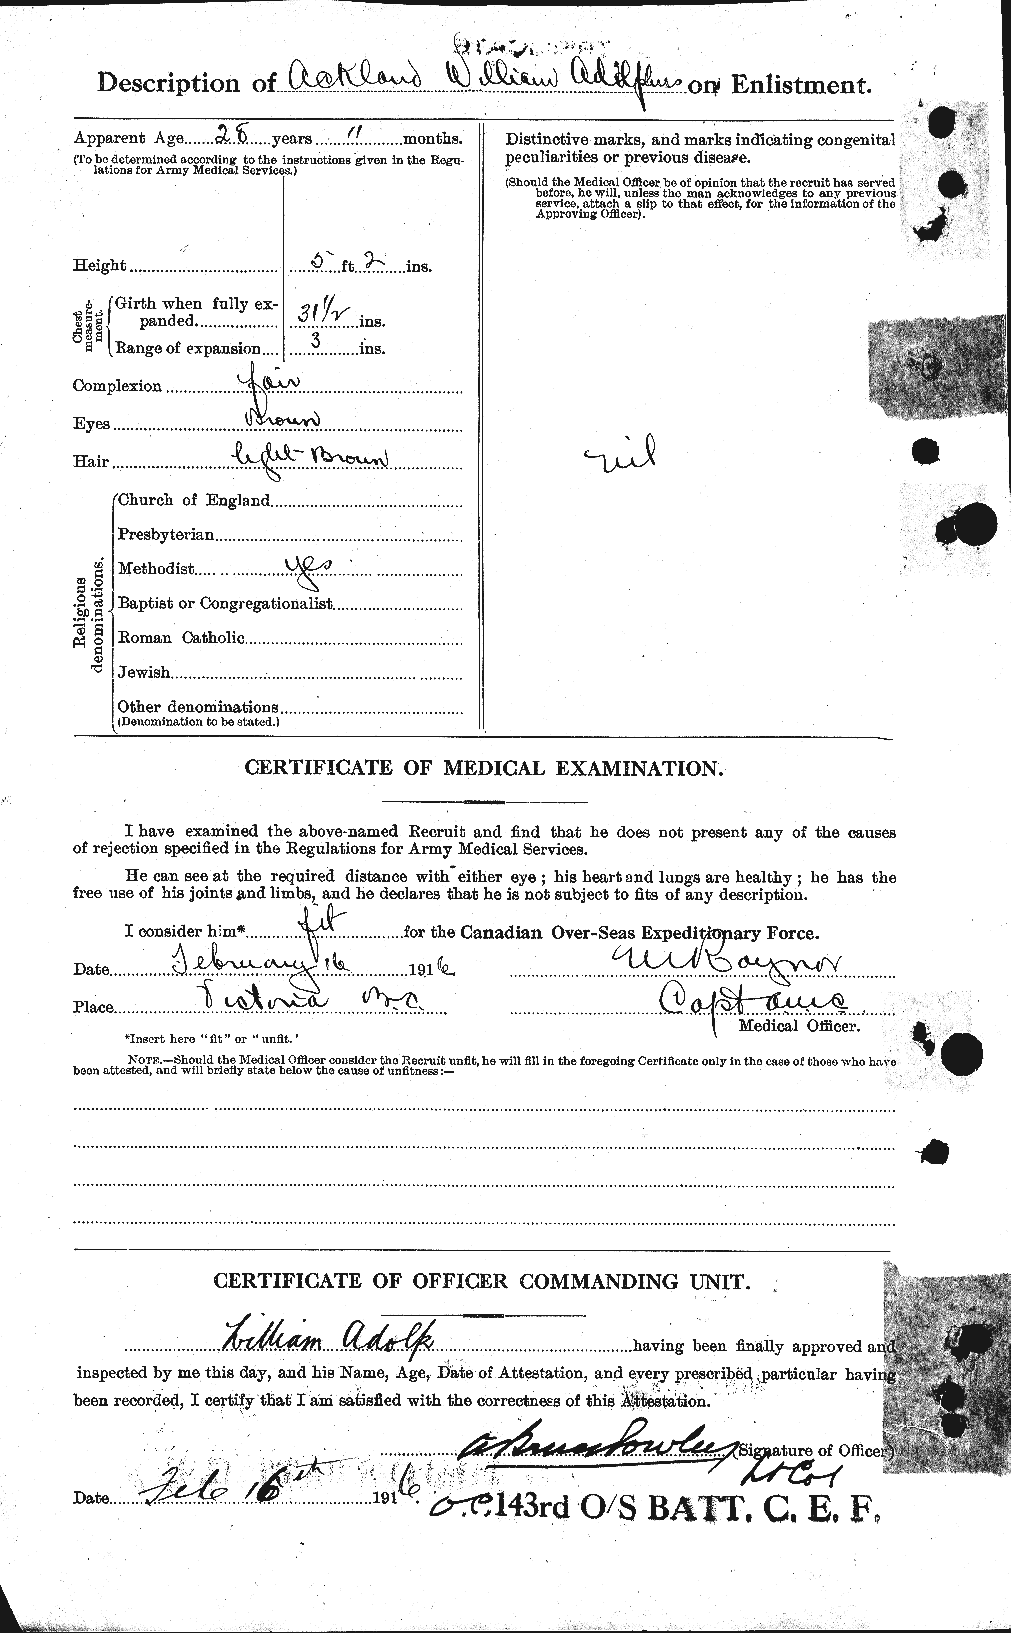 Personnel Records of the First World War - CEF 200693b